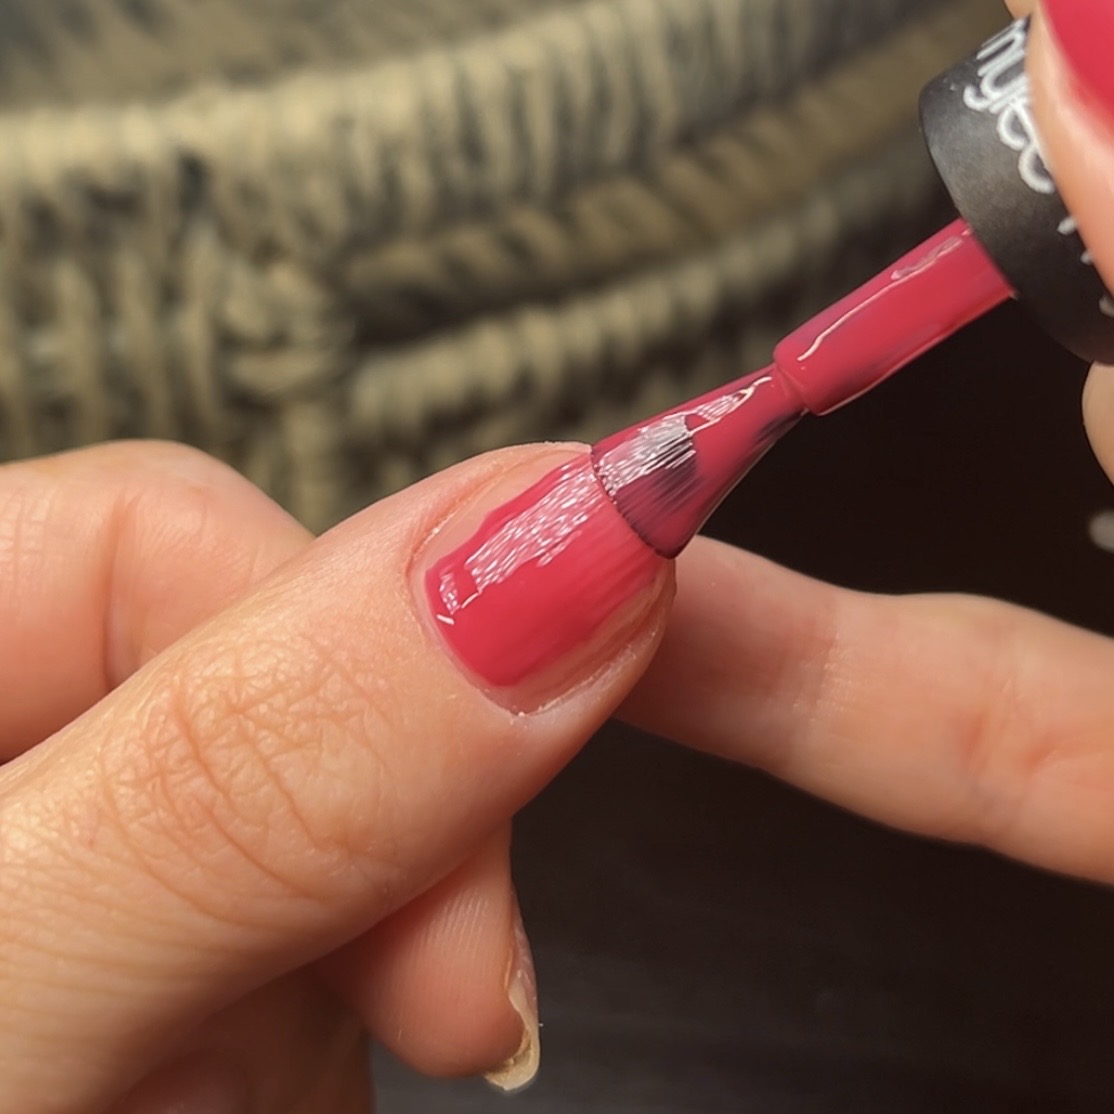 Woman slammed for painting her nails on flight | The Independent